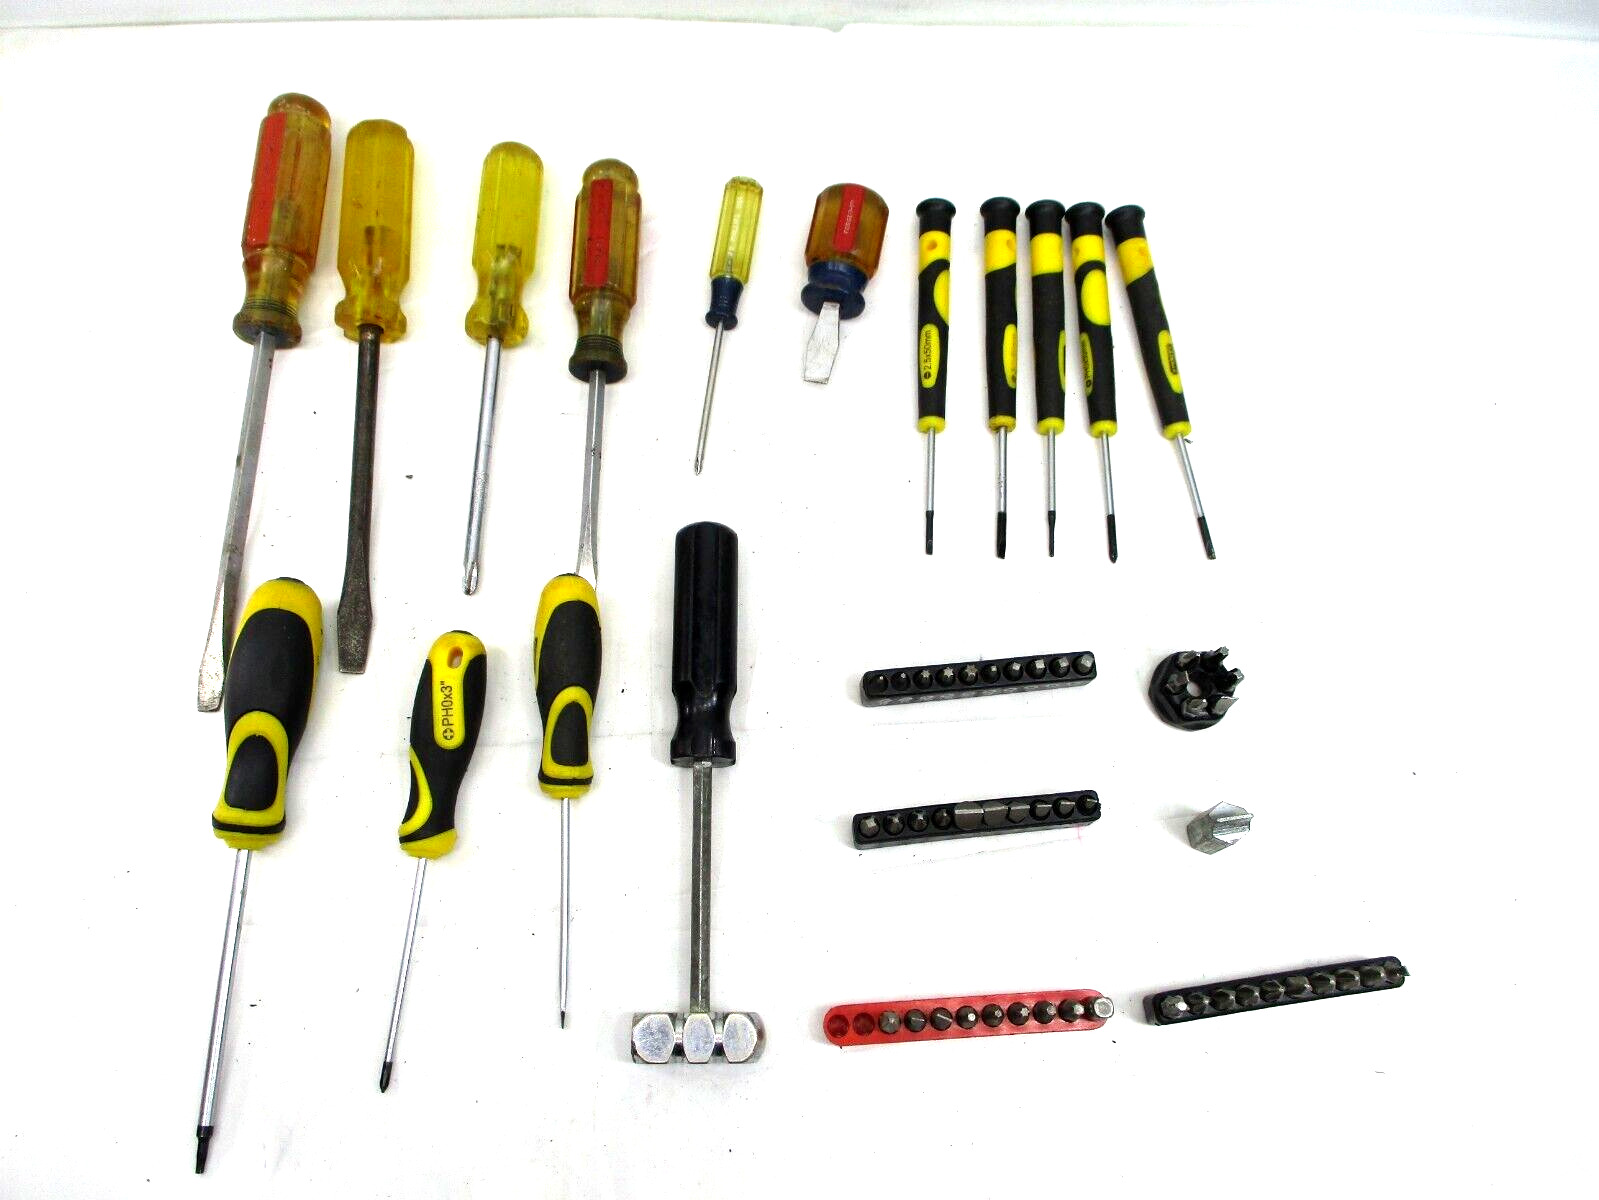 Screw Drivers And Assorted Tools 21 Pieces various Sizes and Brands